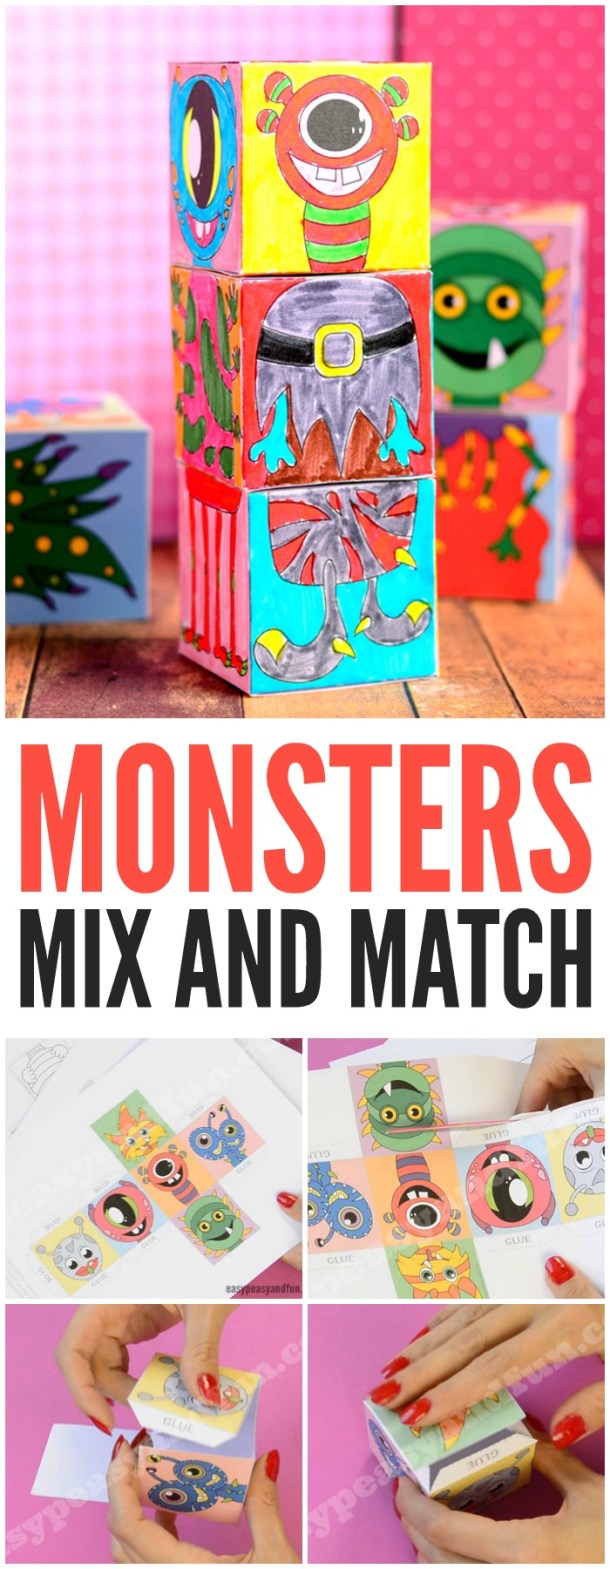 15 Not So Scary Monster Crafts For Kids (Part 1) - Monster Crafts For Kids, Monster Crafts, Halloween Crafts for Kids, halloween crafts, diy Halloween